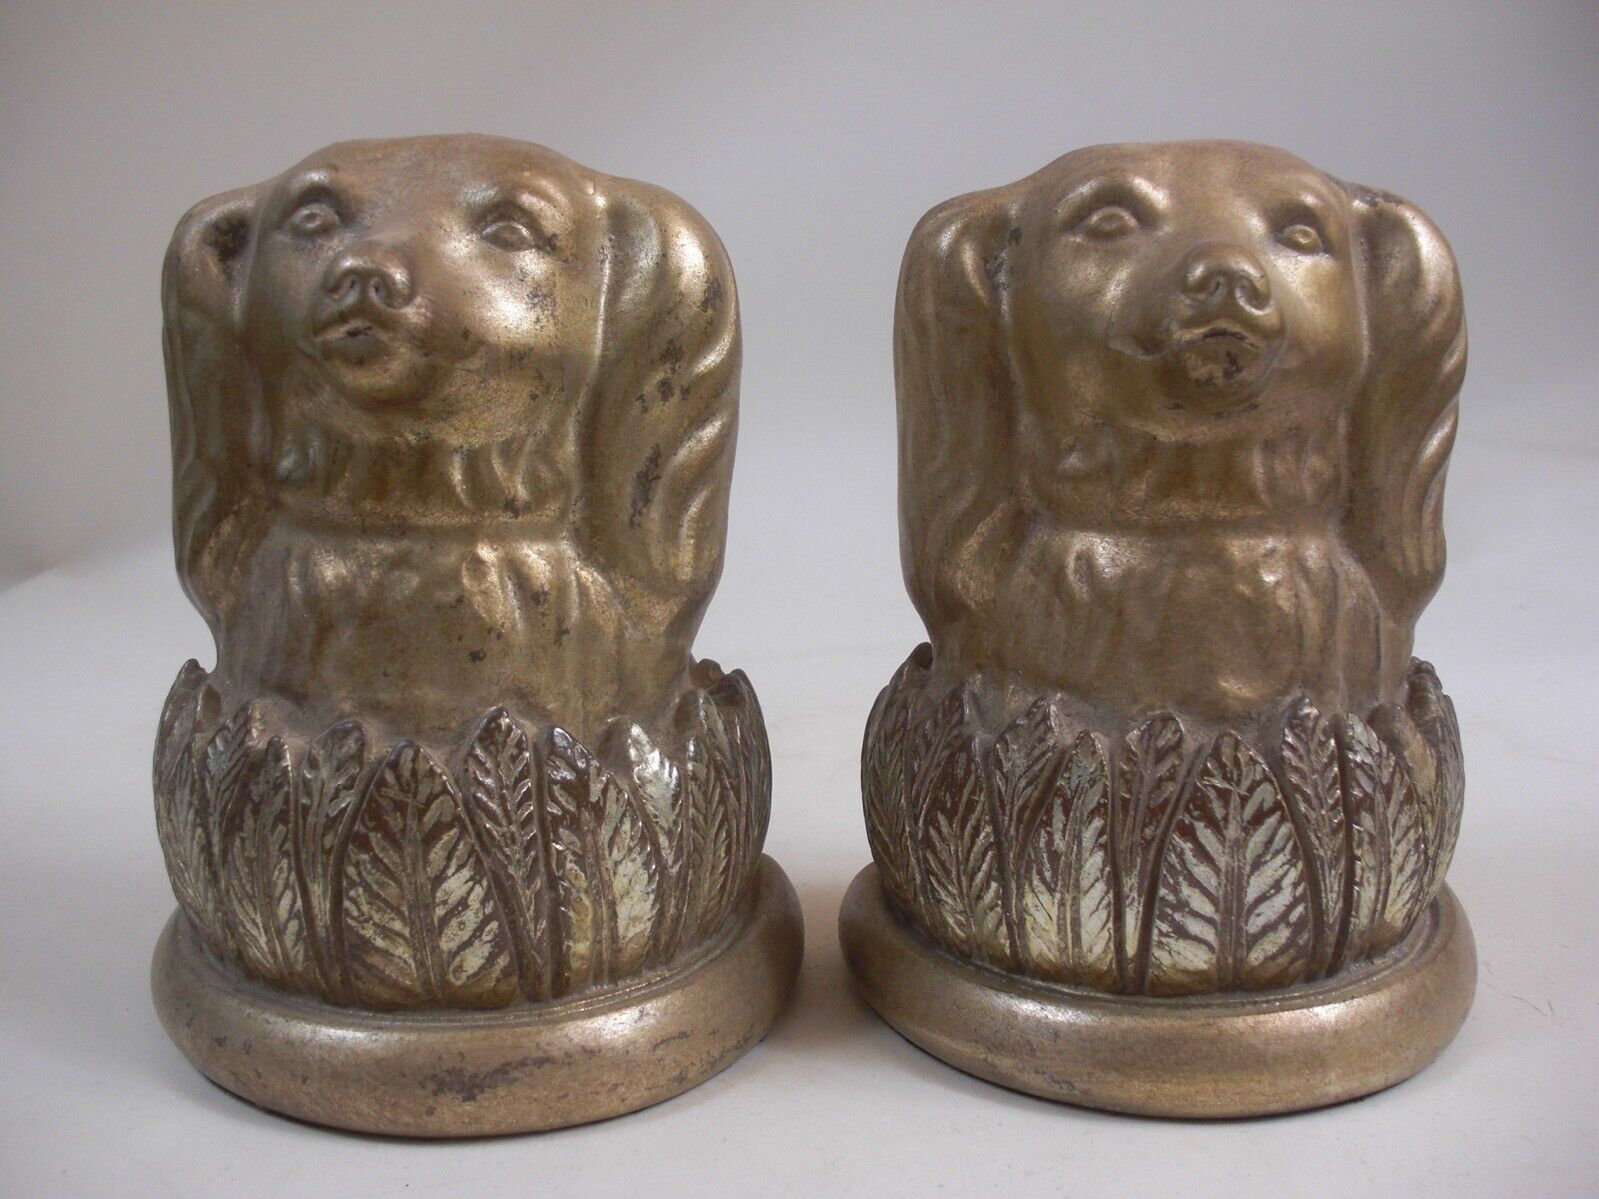 Rare Pr Large Gilded Spaniel Head Bookends Bust Laurel English Grand Tour Style